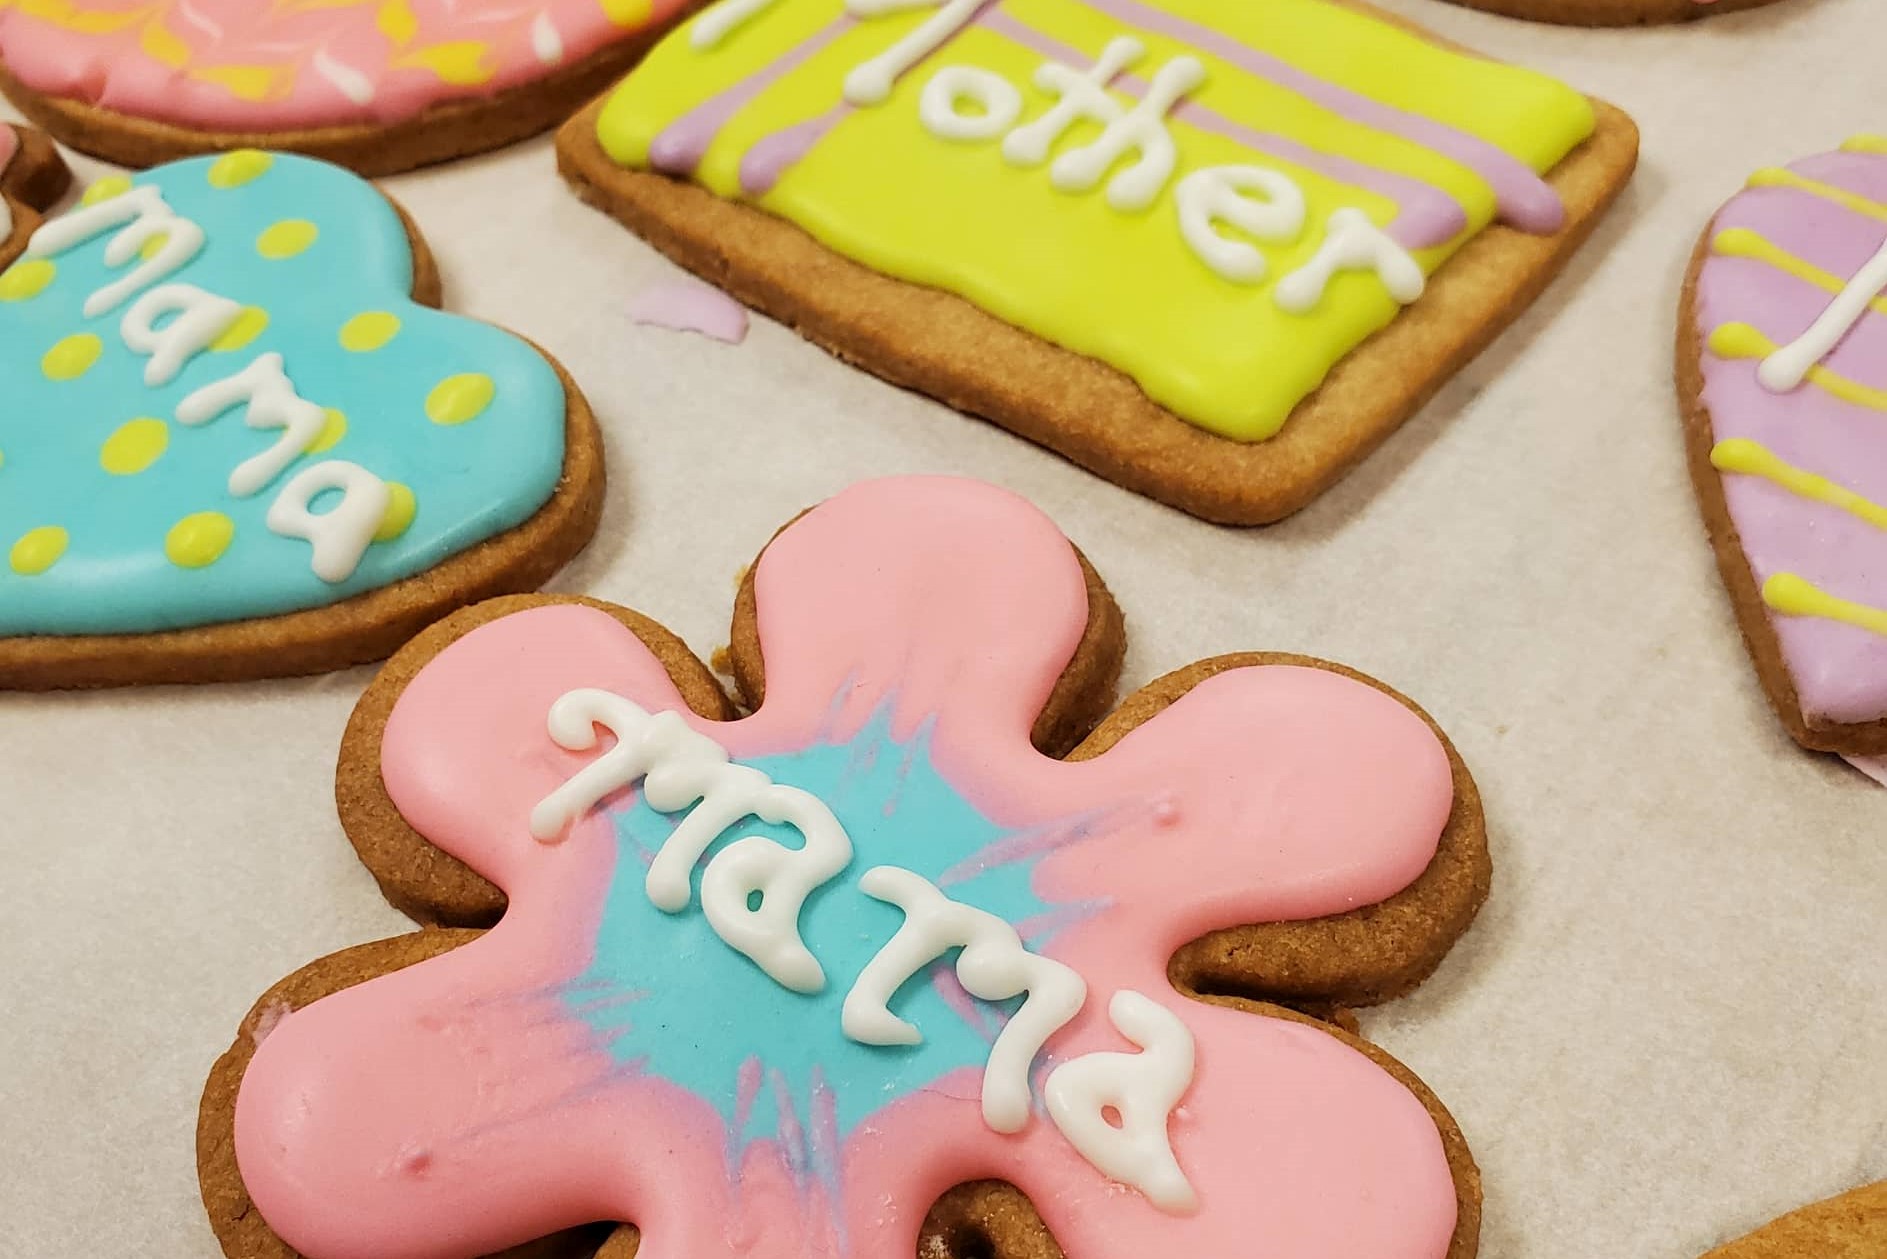 Brightly colored cookies with words like "Mama" and "Mother" written on them in frosting sit on white parchment paper